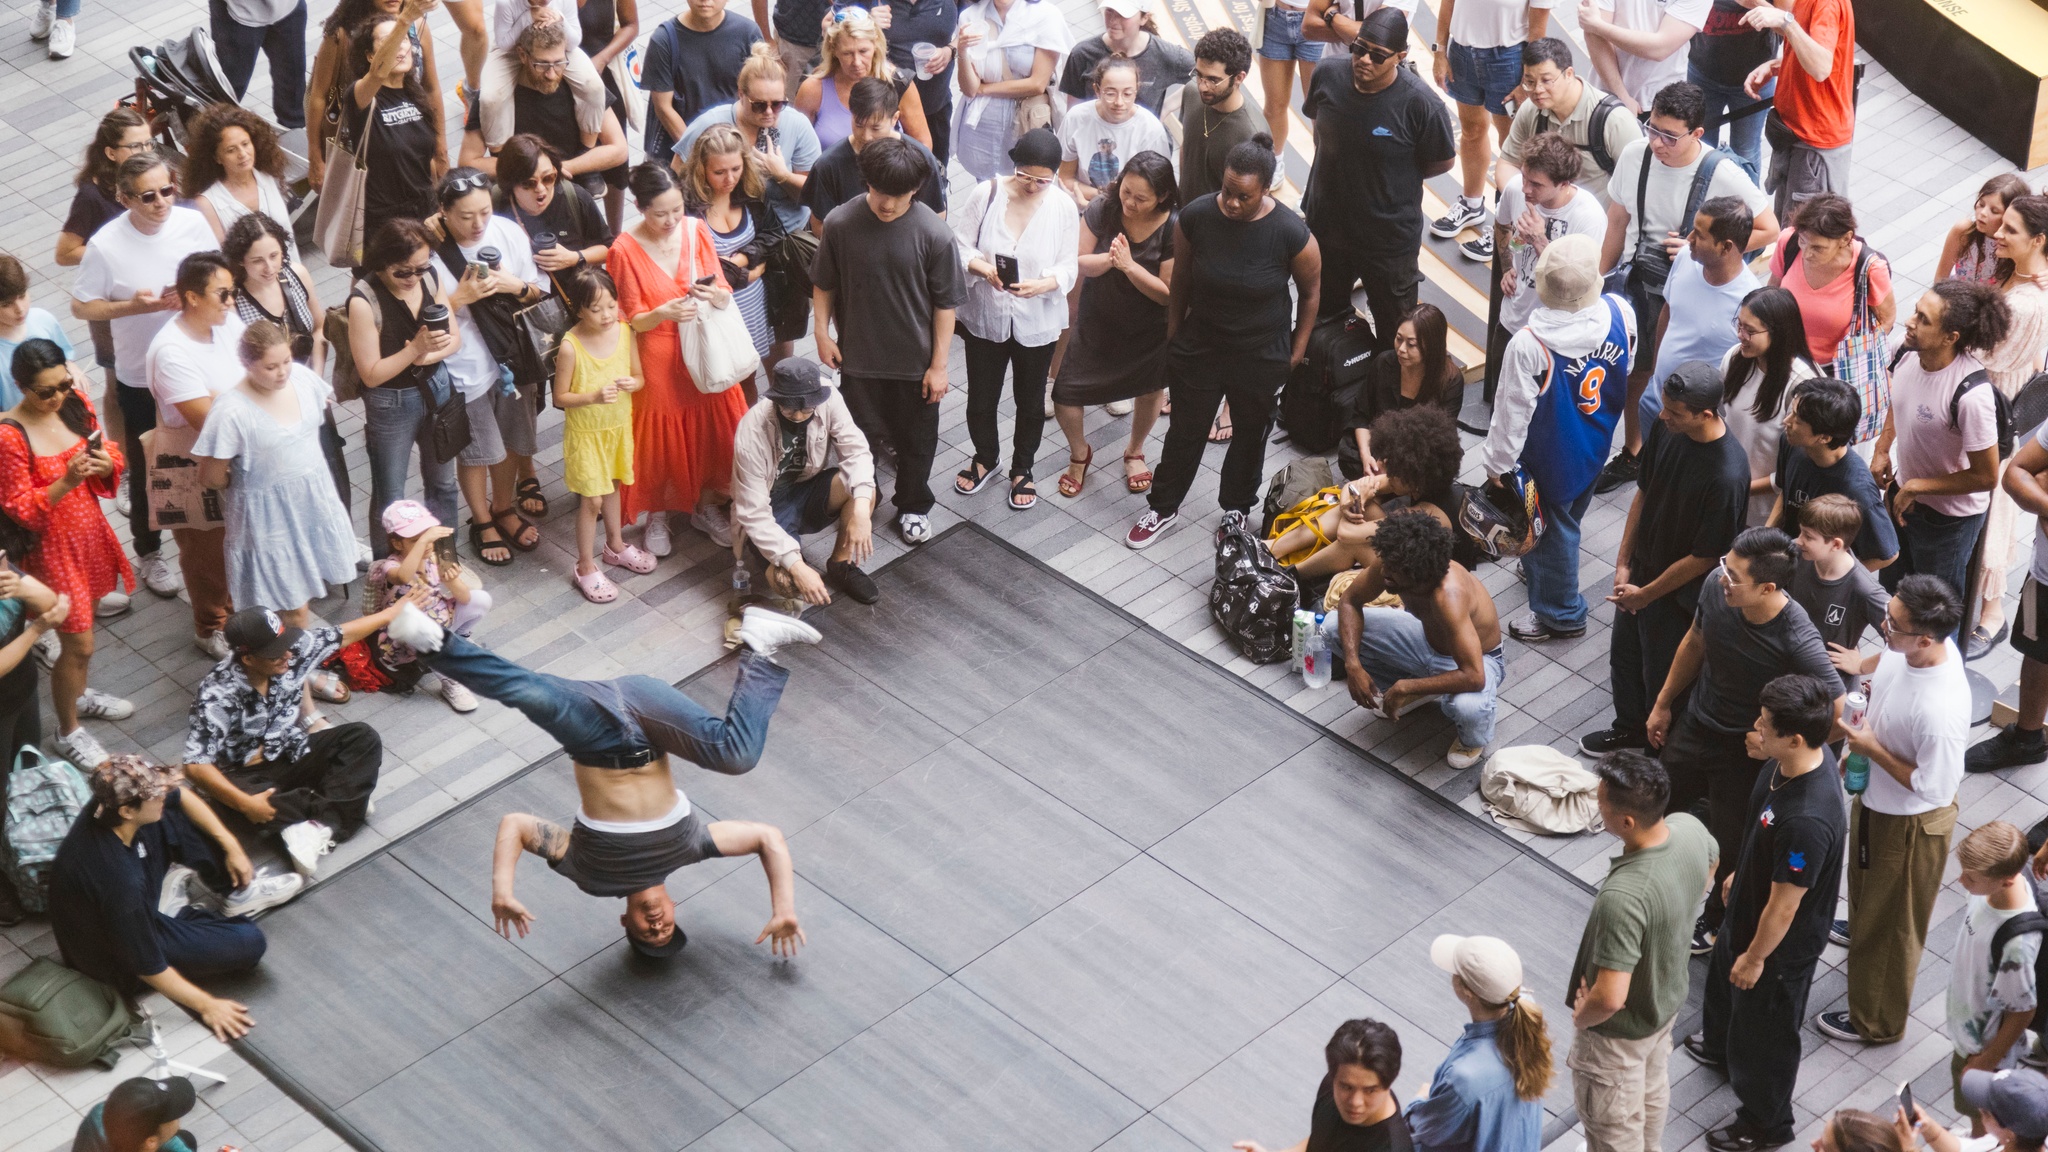 A breakdancer spins on his head on an outdoor dance floor surrounded by an excited audience. 